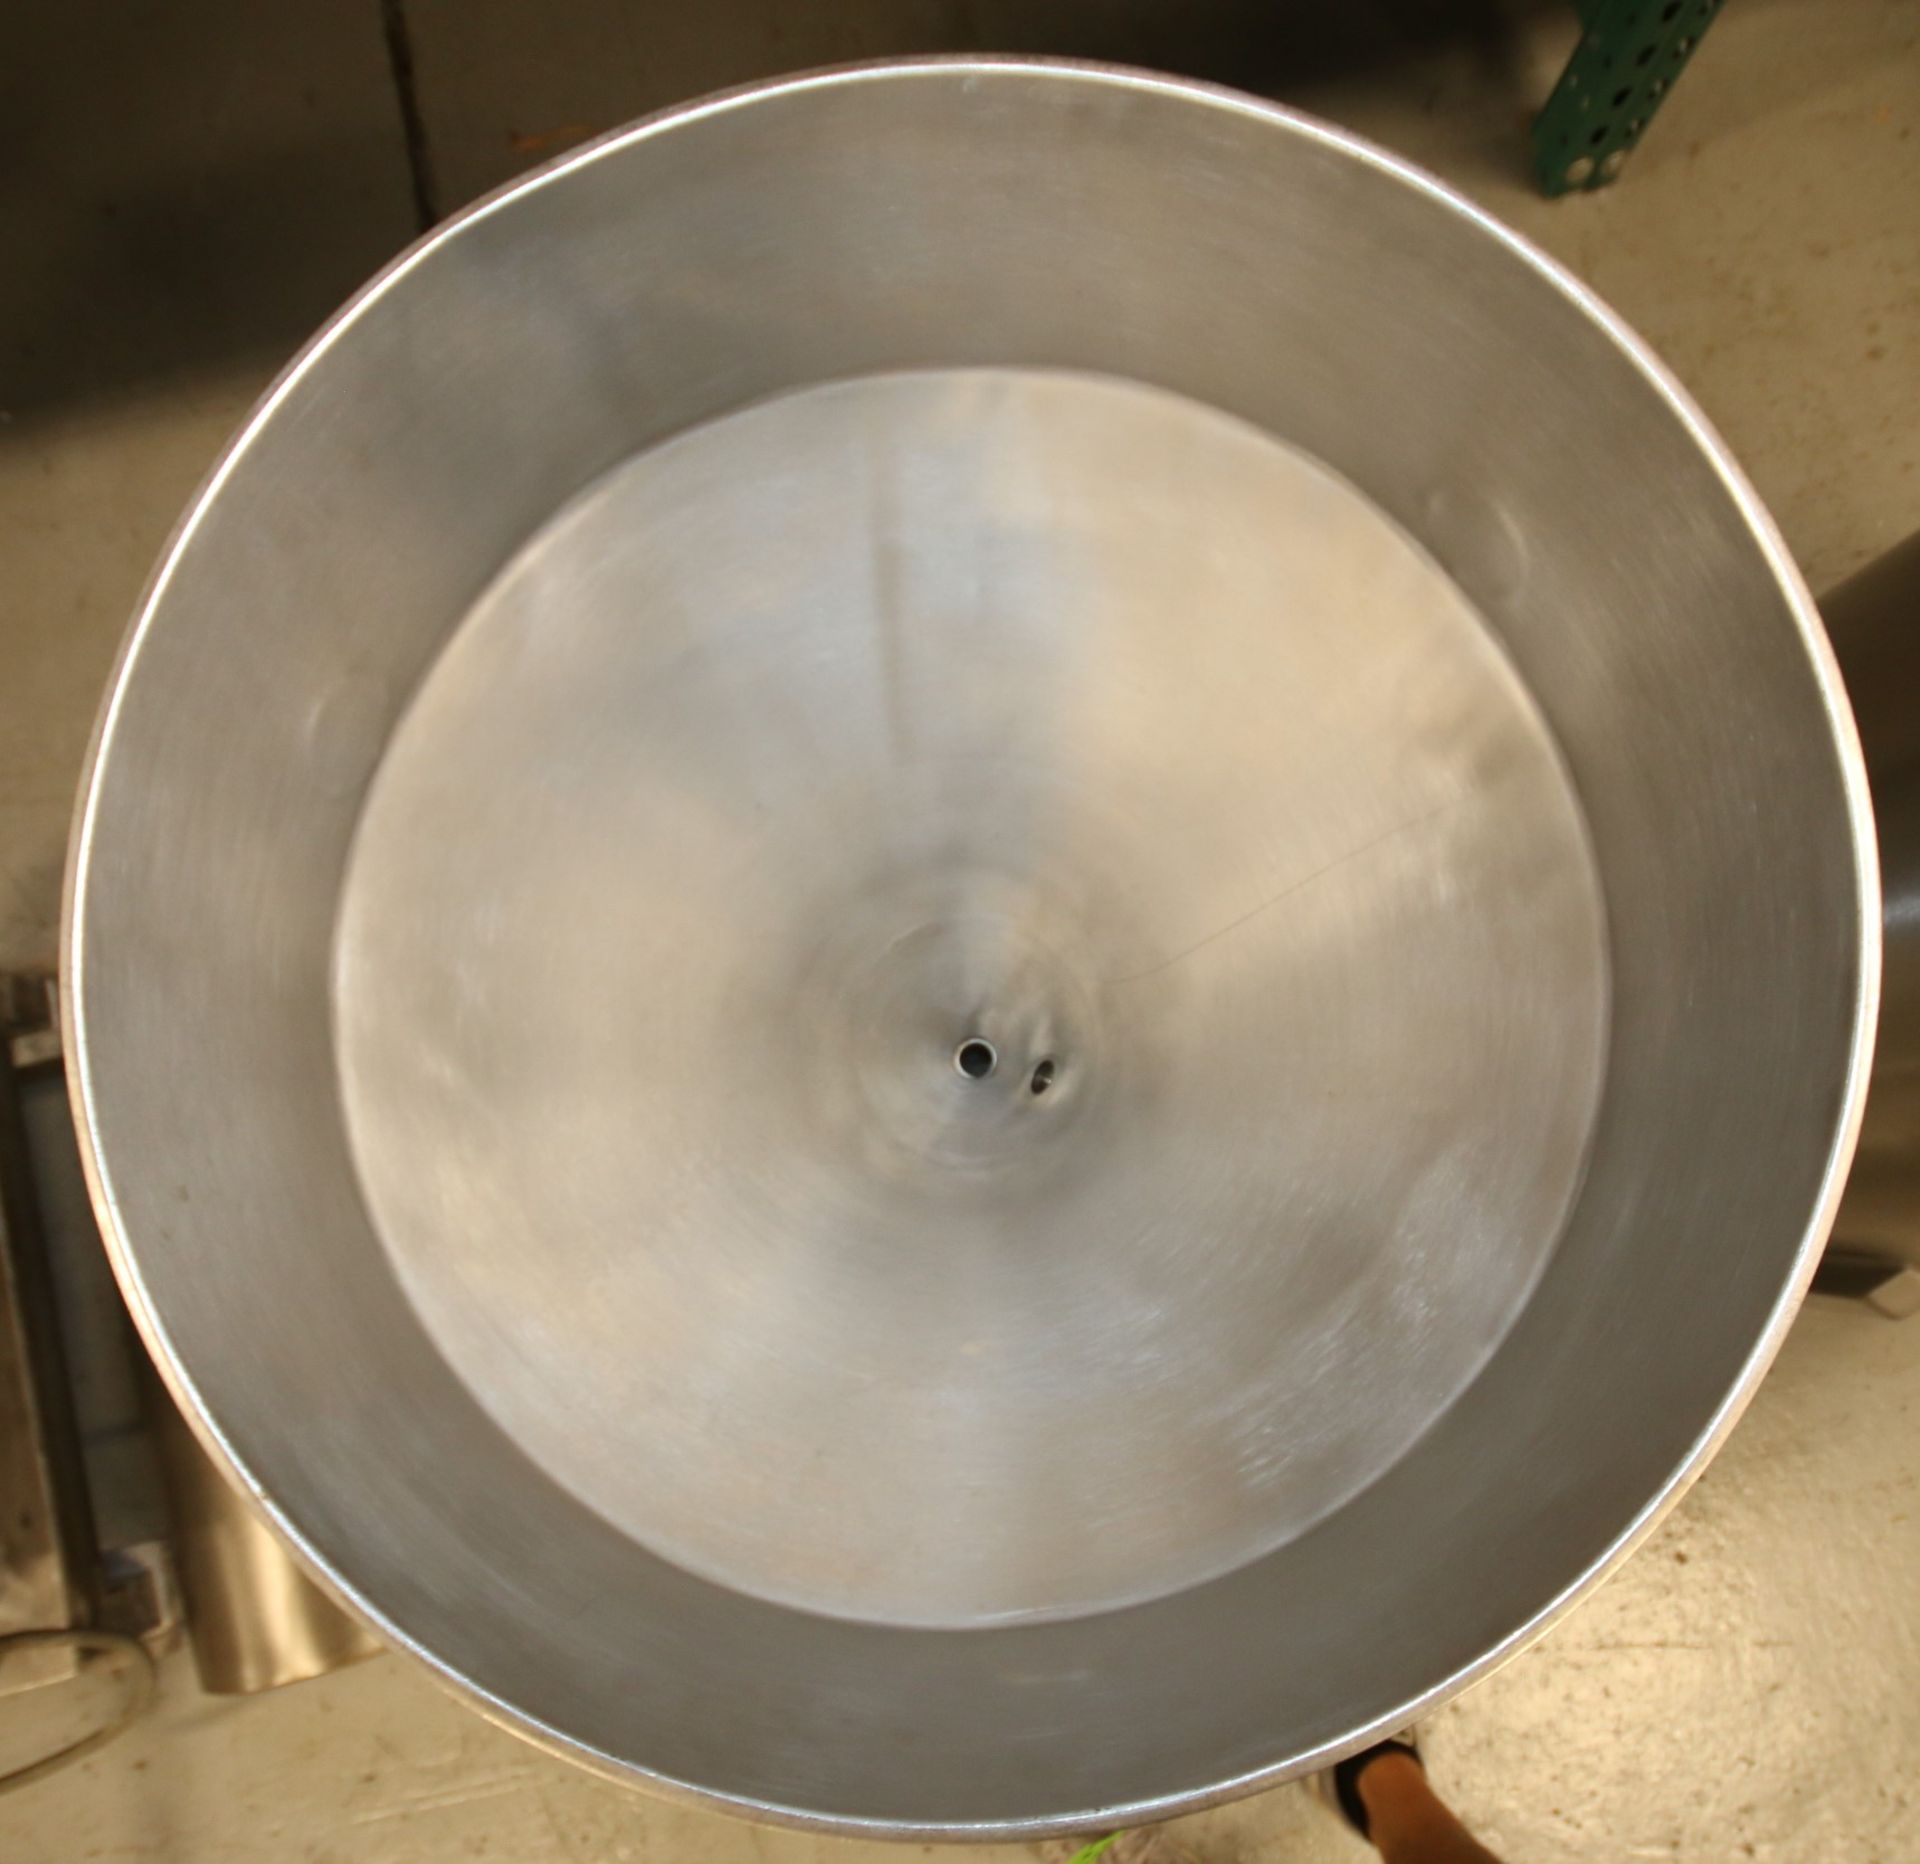 25" W x 30" D Portable S/S Funnel with Bottom 1.5" Clamp Type Connection, Mounted on Casters - Image 2 of 3